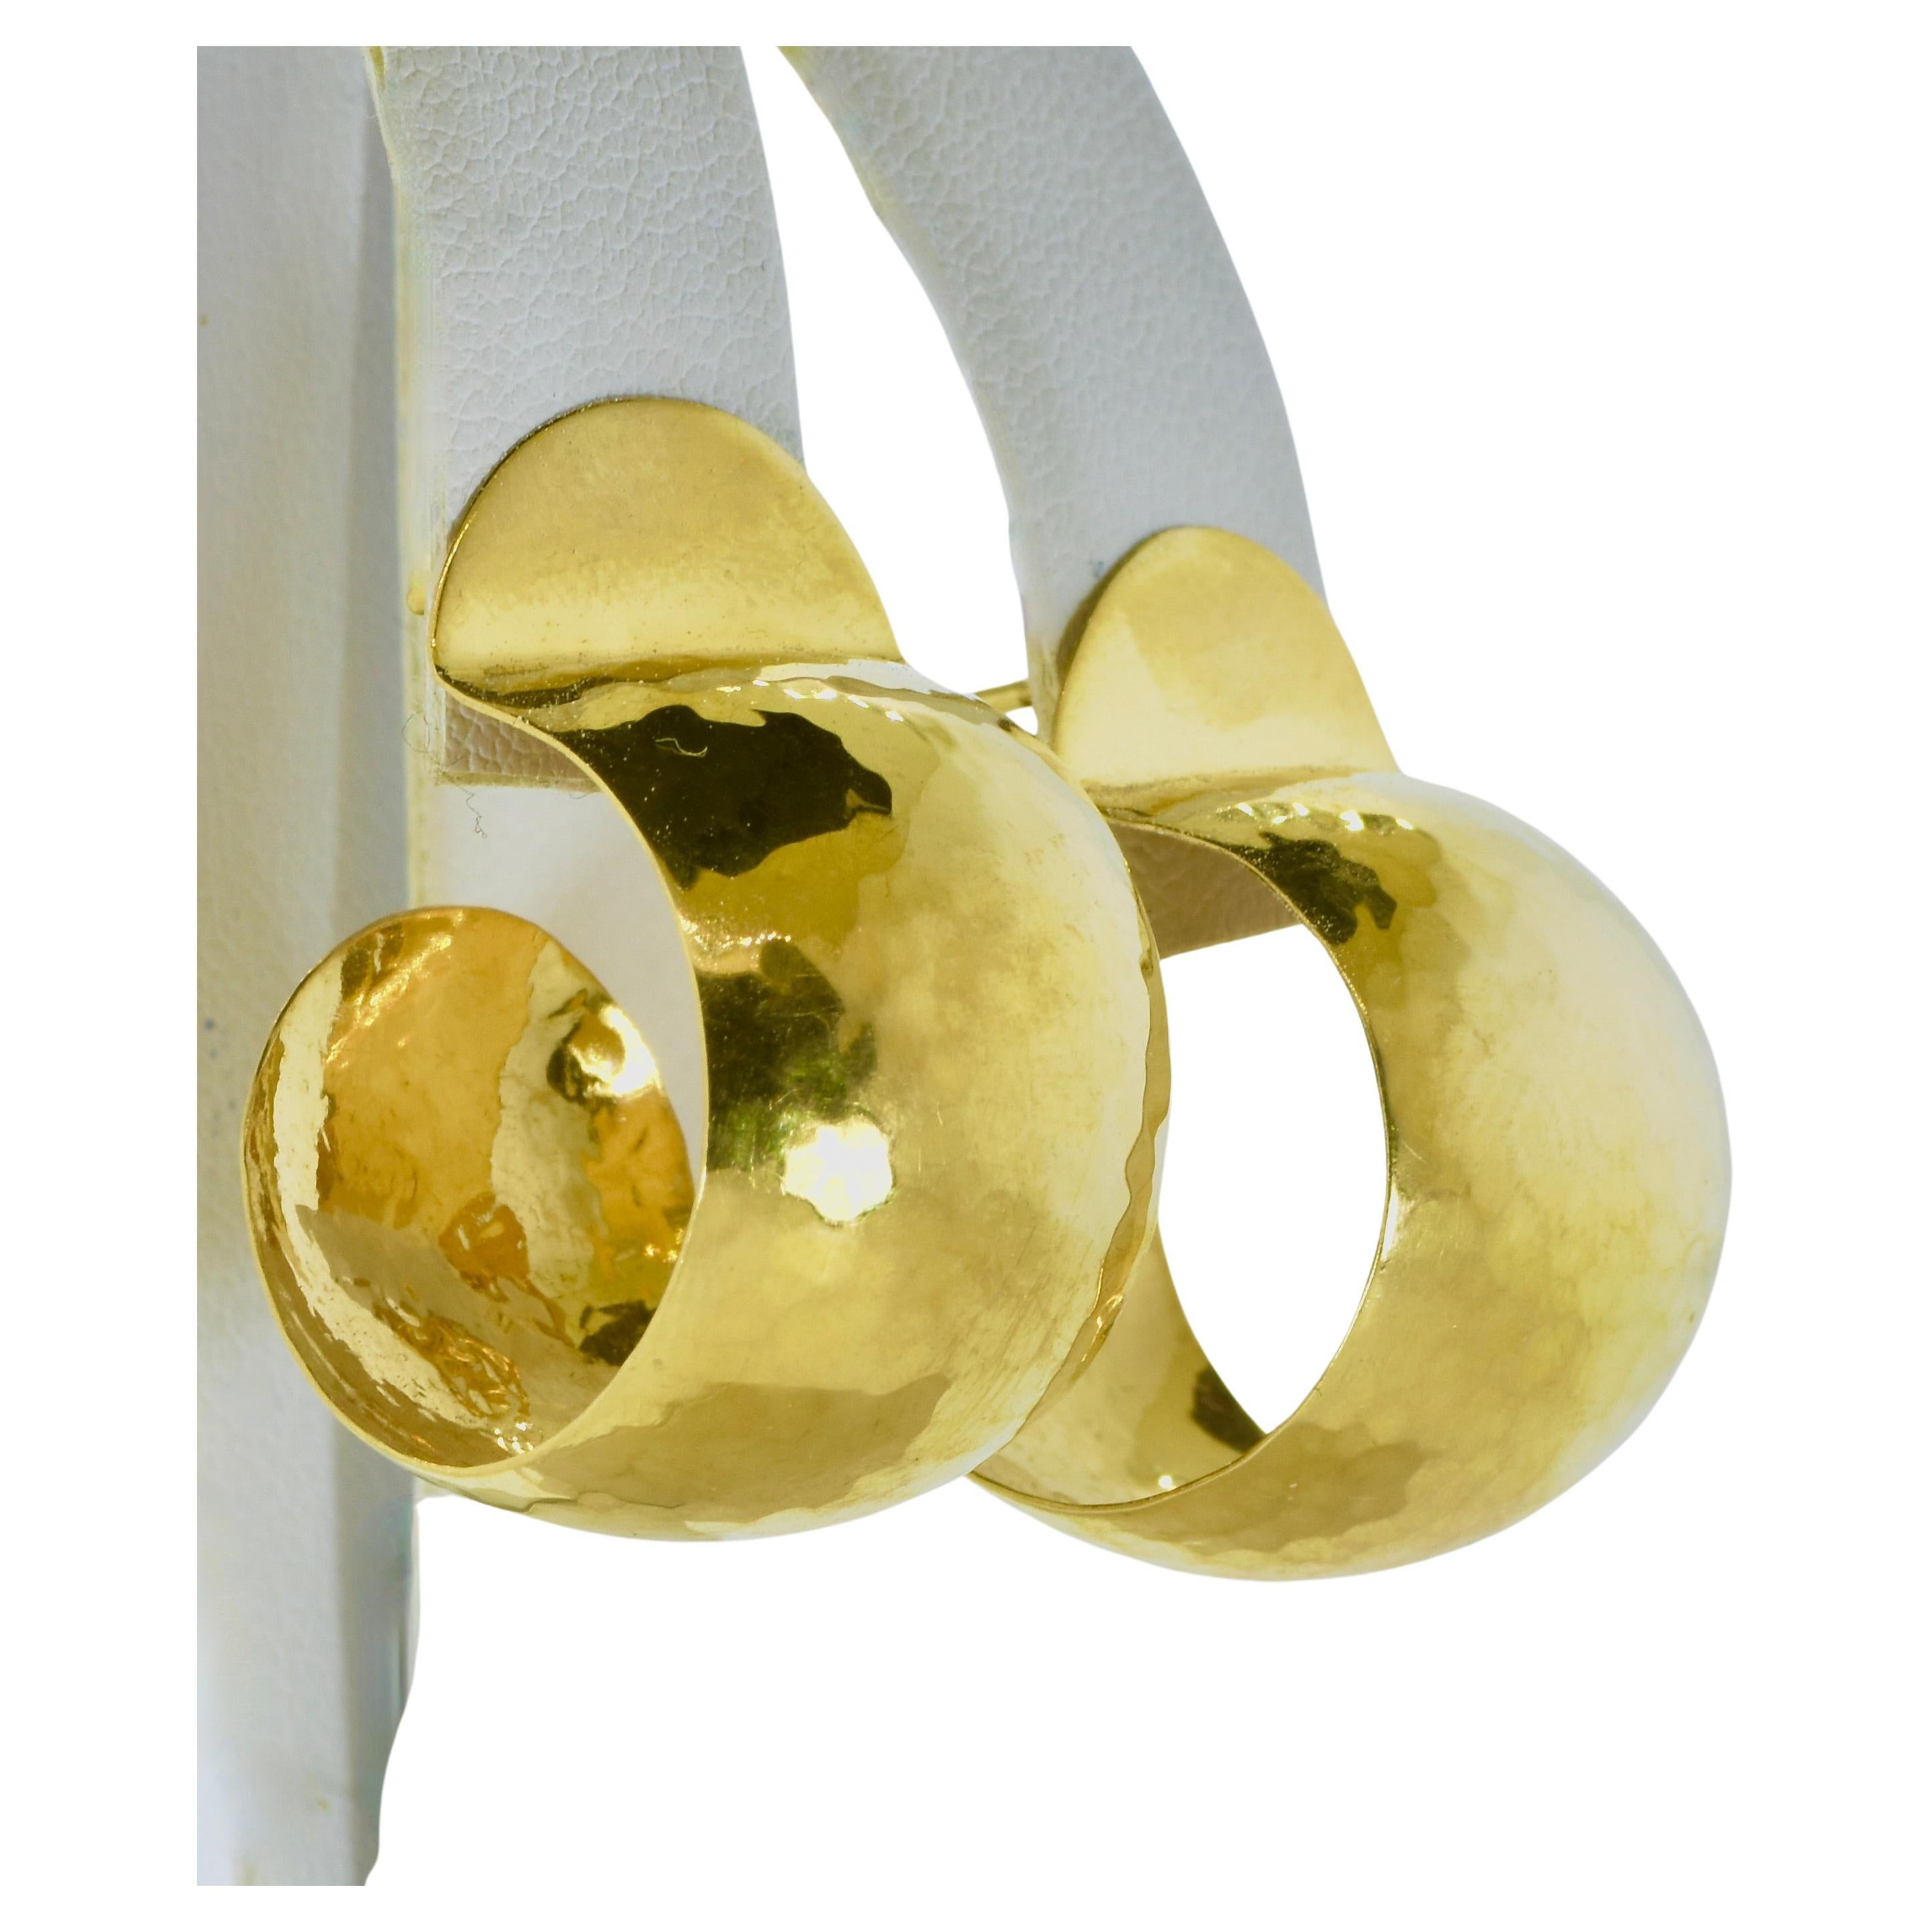 Hoop Style Earrings in Bright Yellow Gold, Hammered Finish Contemporary, c. 2000